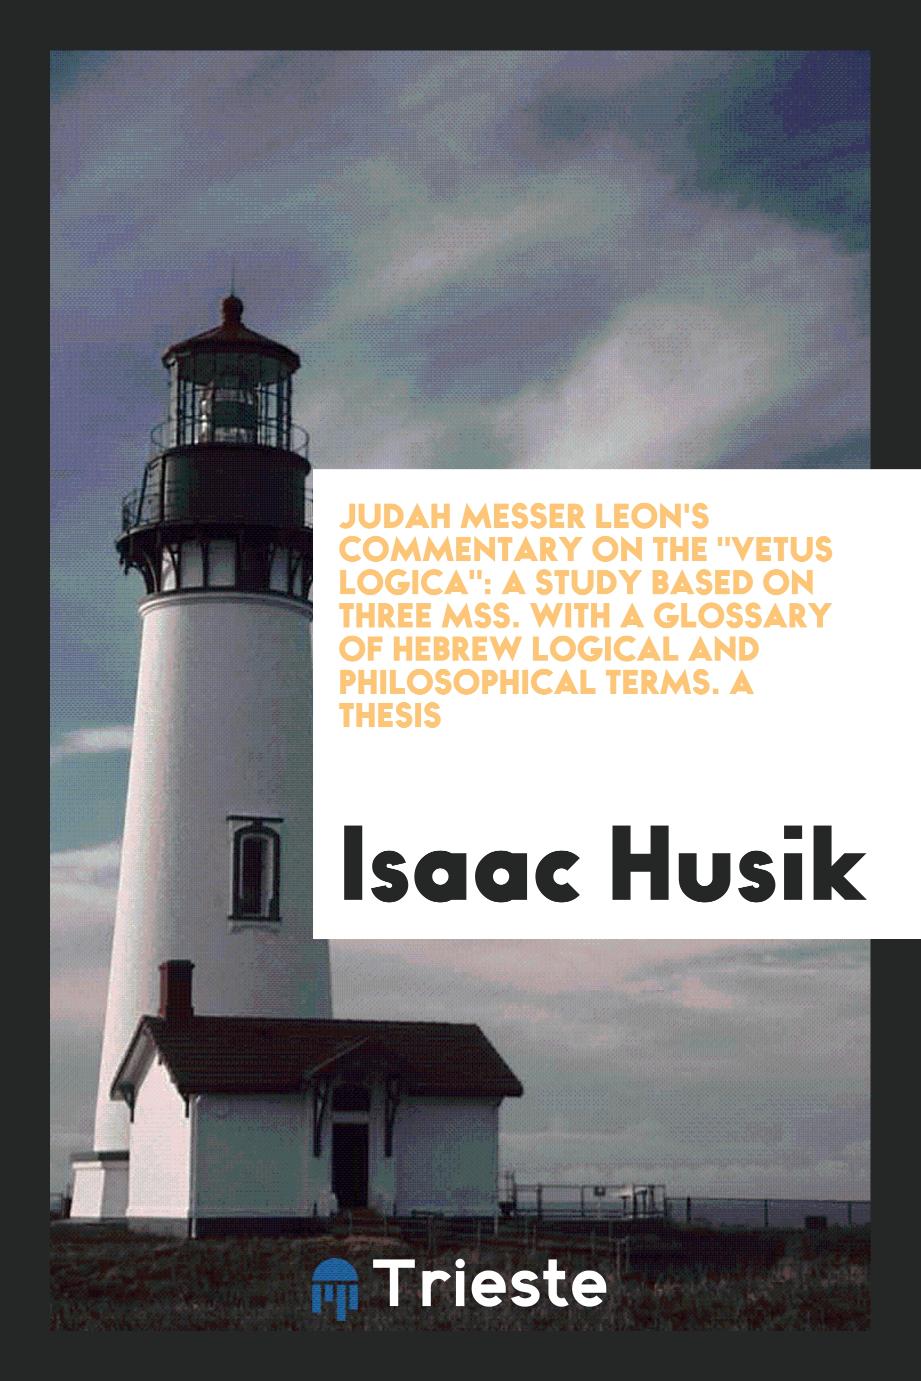 Judah Messer Leon's Commentary on The "Vetus Logica": A Study Based on Three Mss. With a Glossary of Hebrew Logical and Philosophical Terms. A Thesis